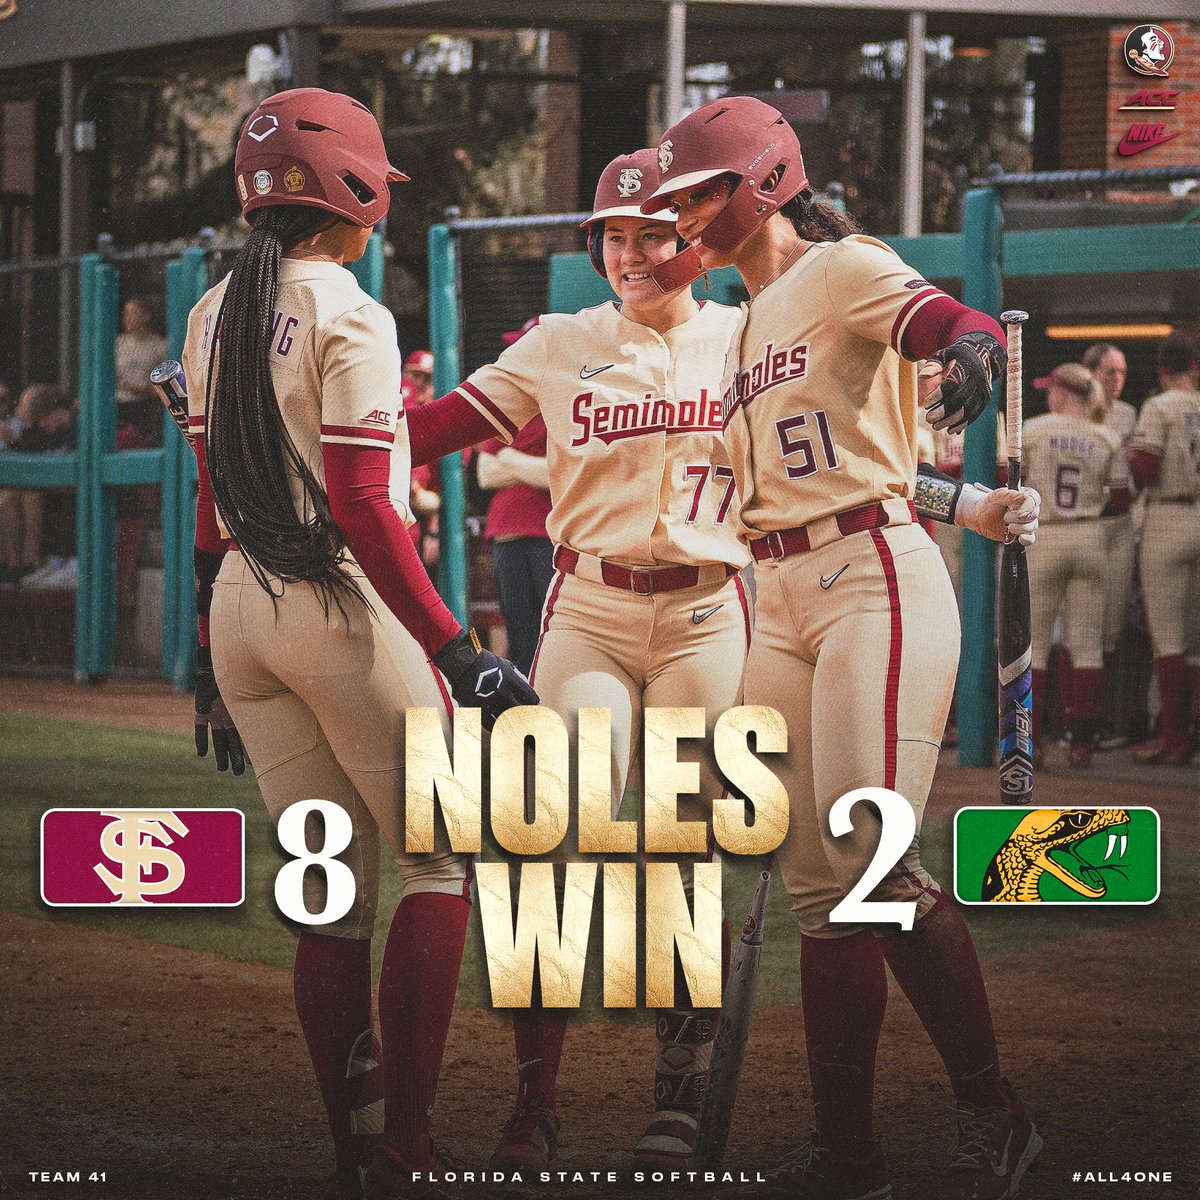 Noles win, Noles win, Noles win🍢 See you Thursday in Clearwater #ALL4ONE